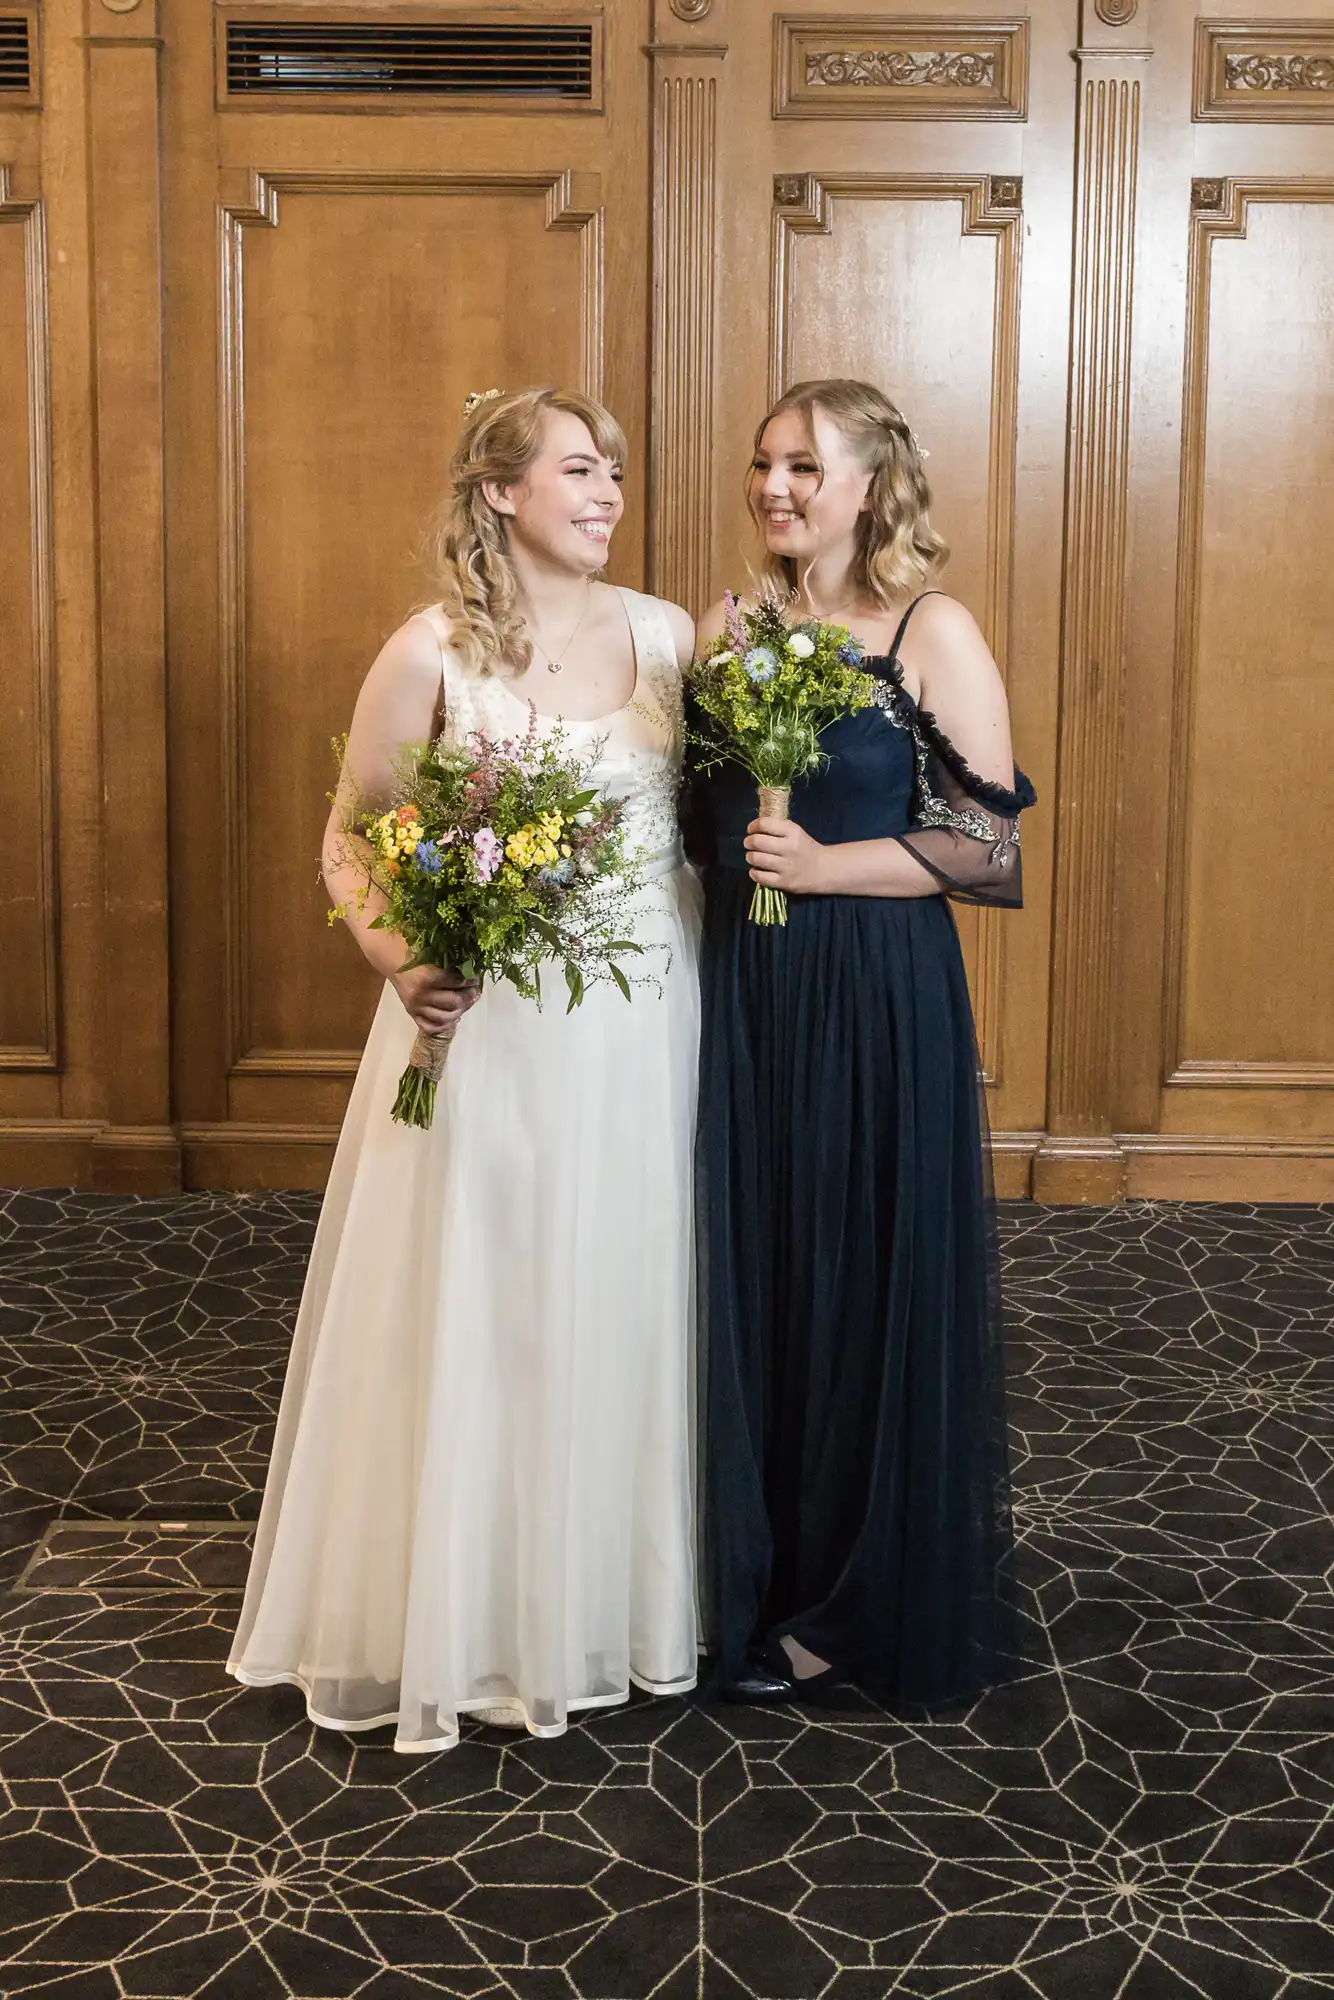 Two women in elegant dresses, one in white and one in navy blue, smiling and holding bouquets in a grand hall.